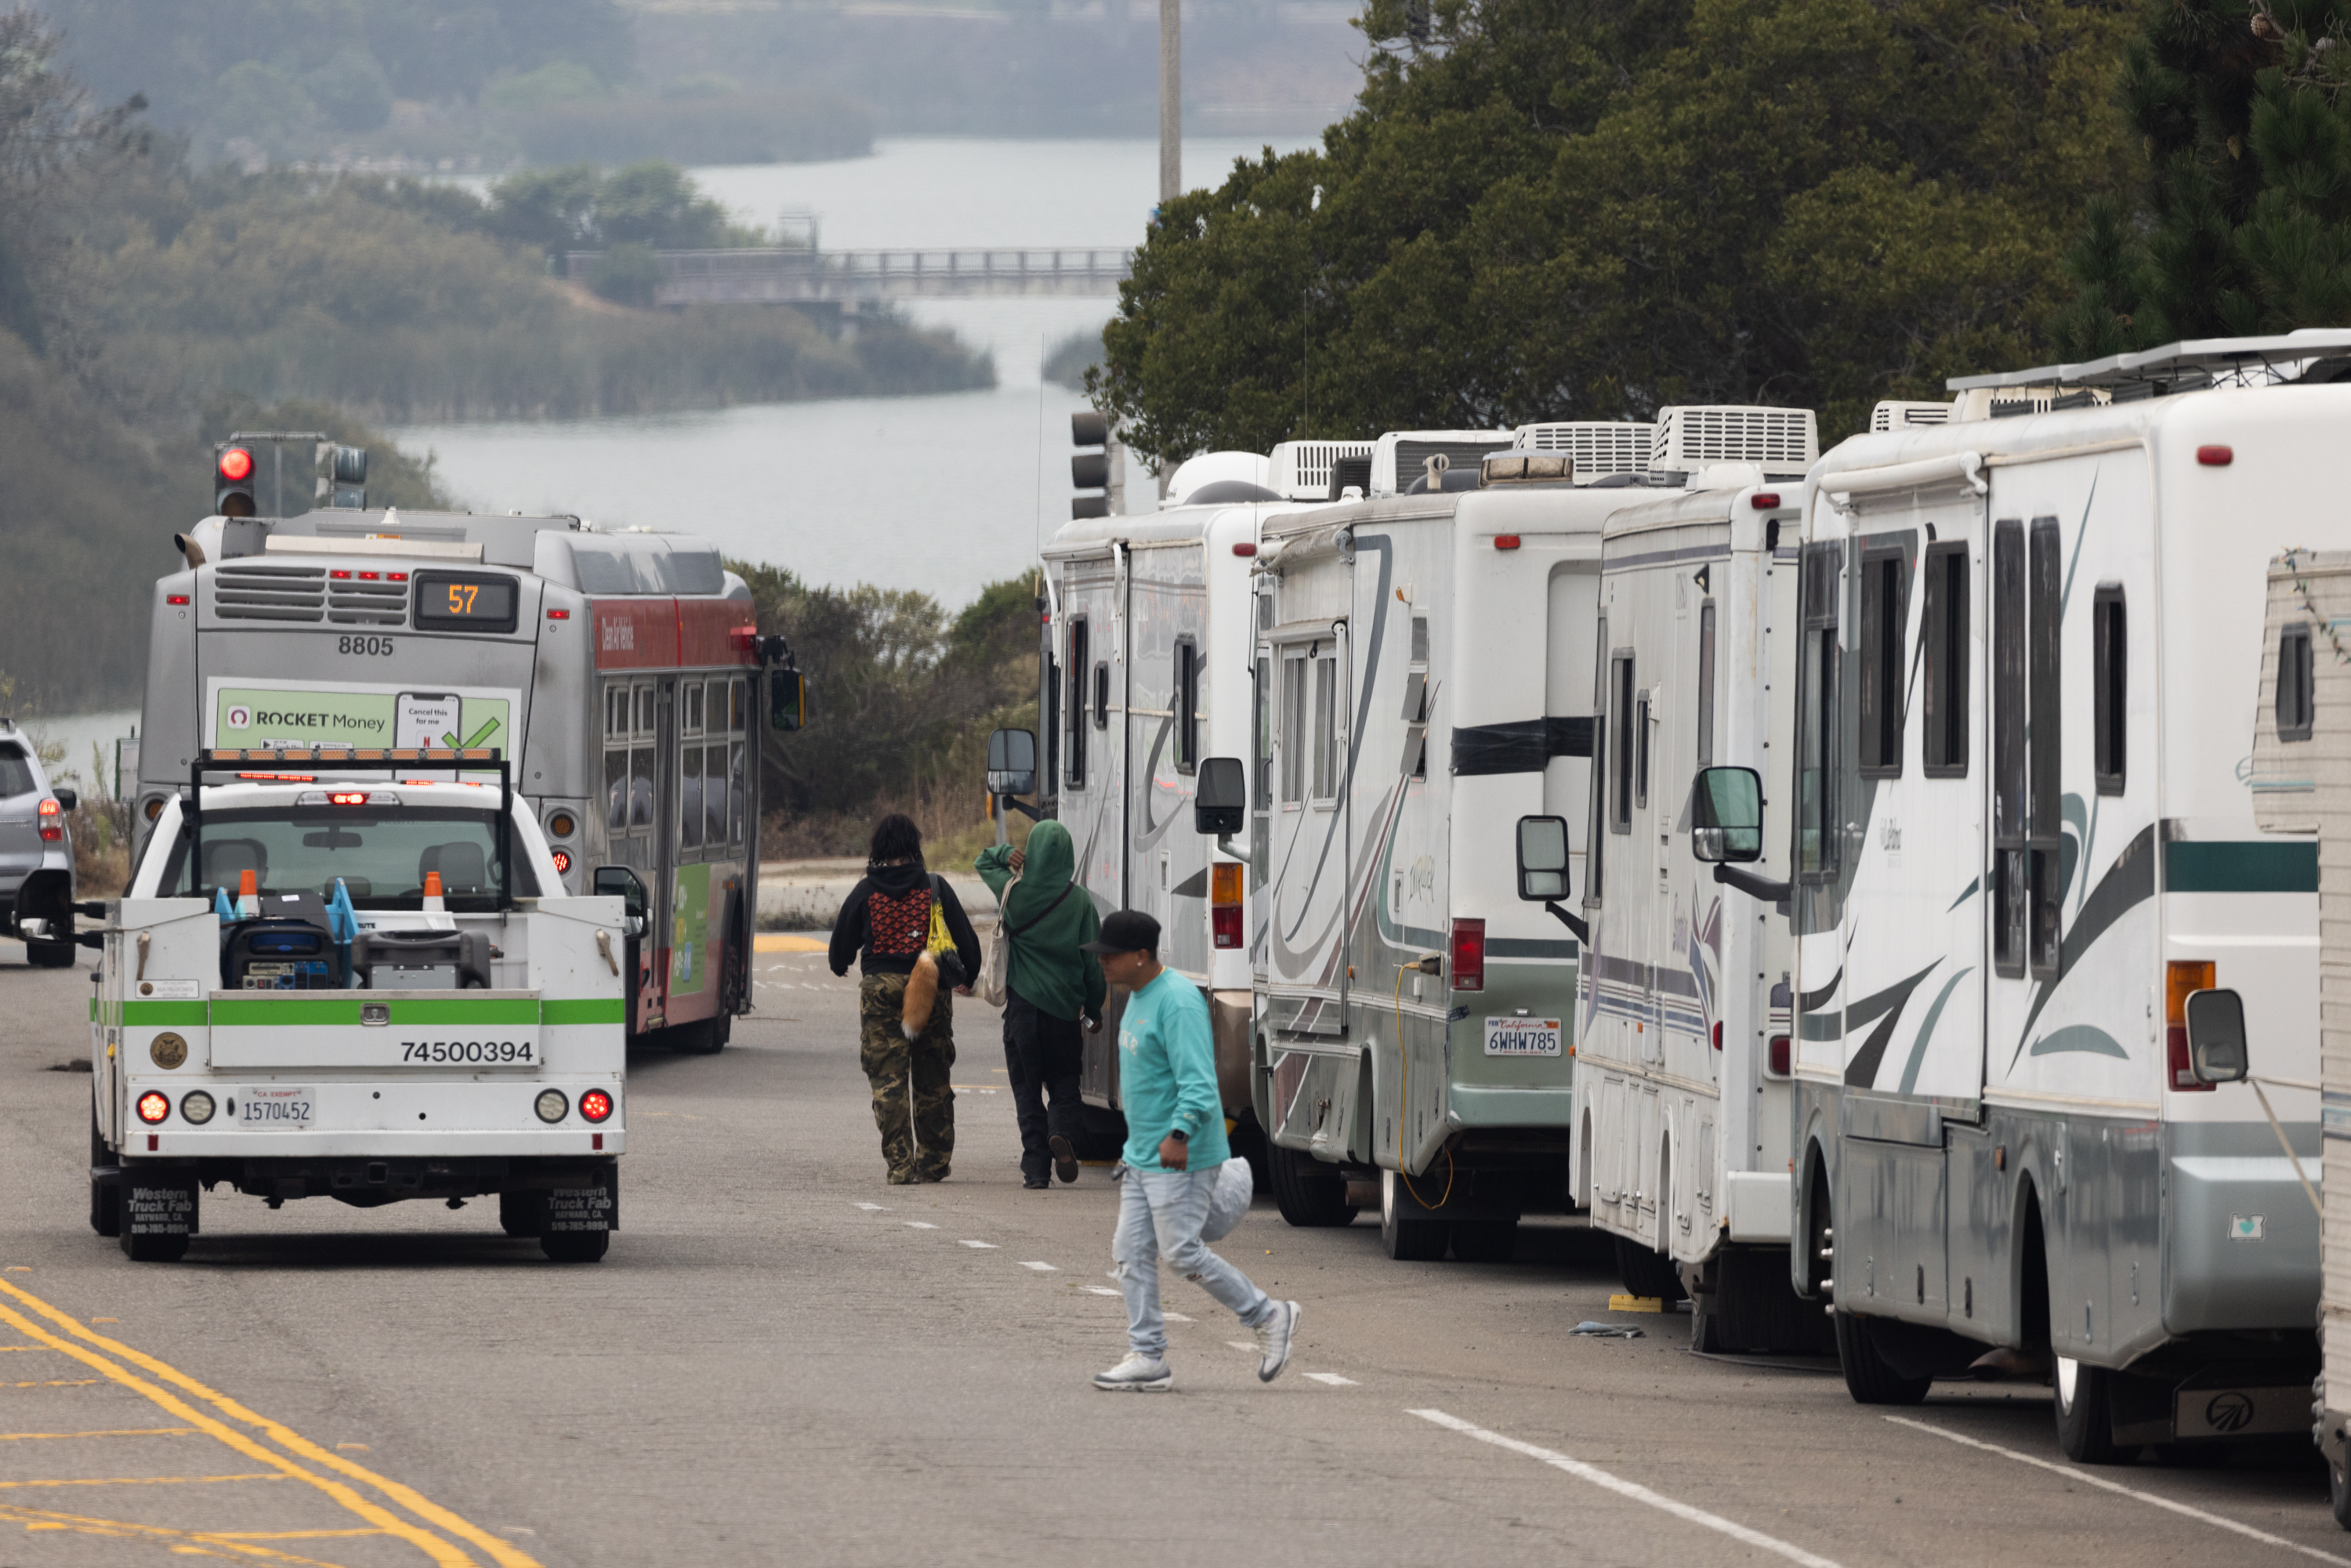 A line of RVs parked as people cross the street.